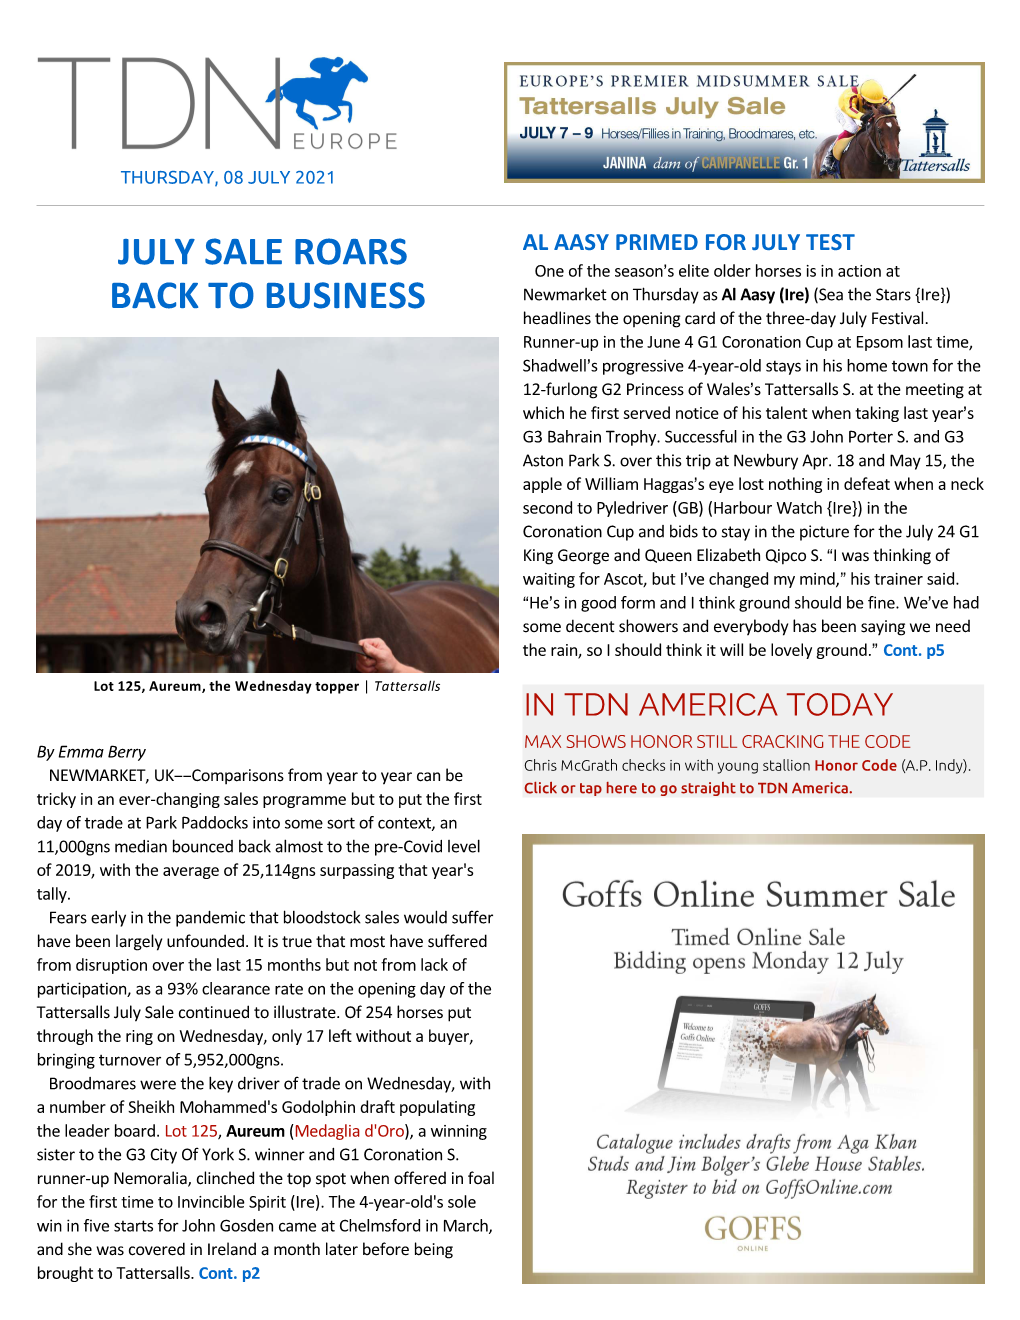 Tdn Europe • Page 2 of 13 • Thetdn.Com Thursday • 08 July 2021